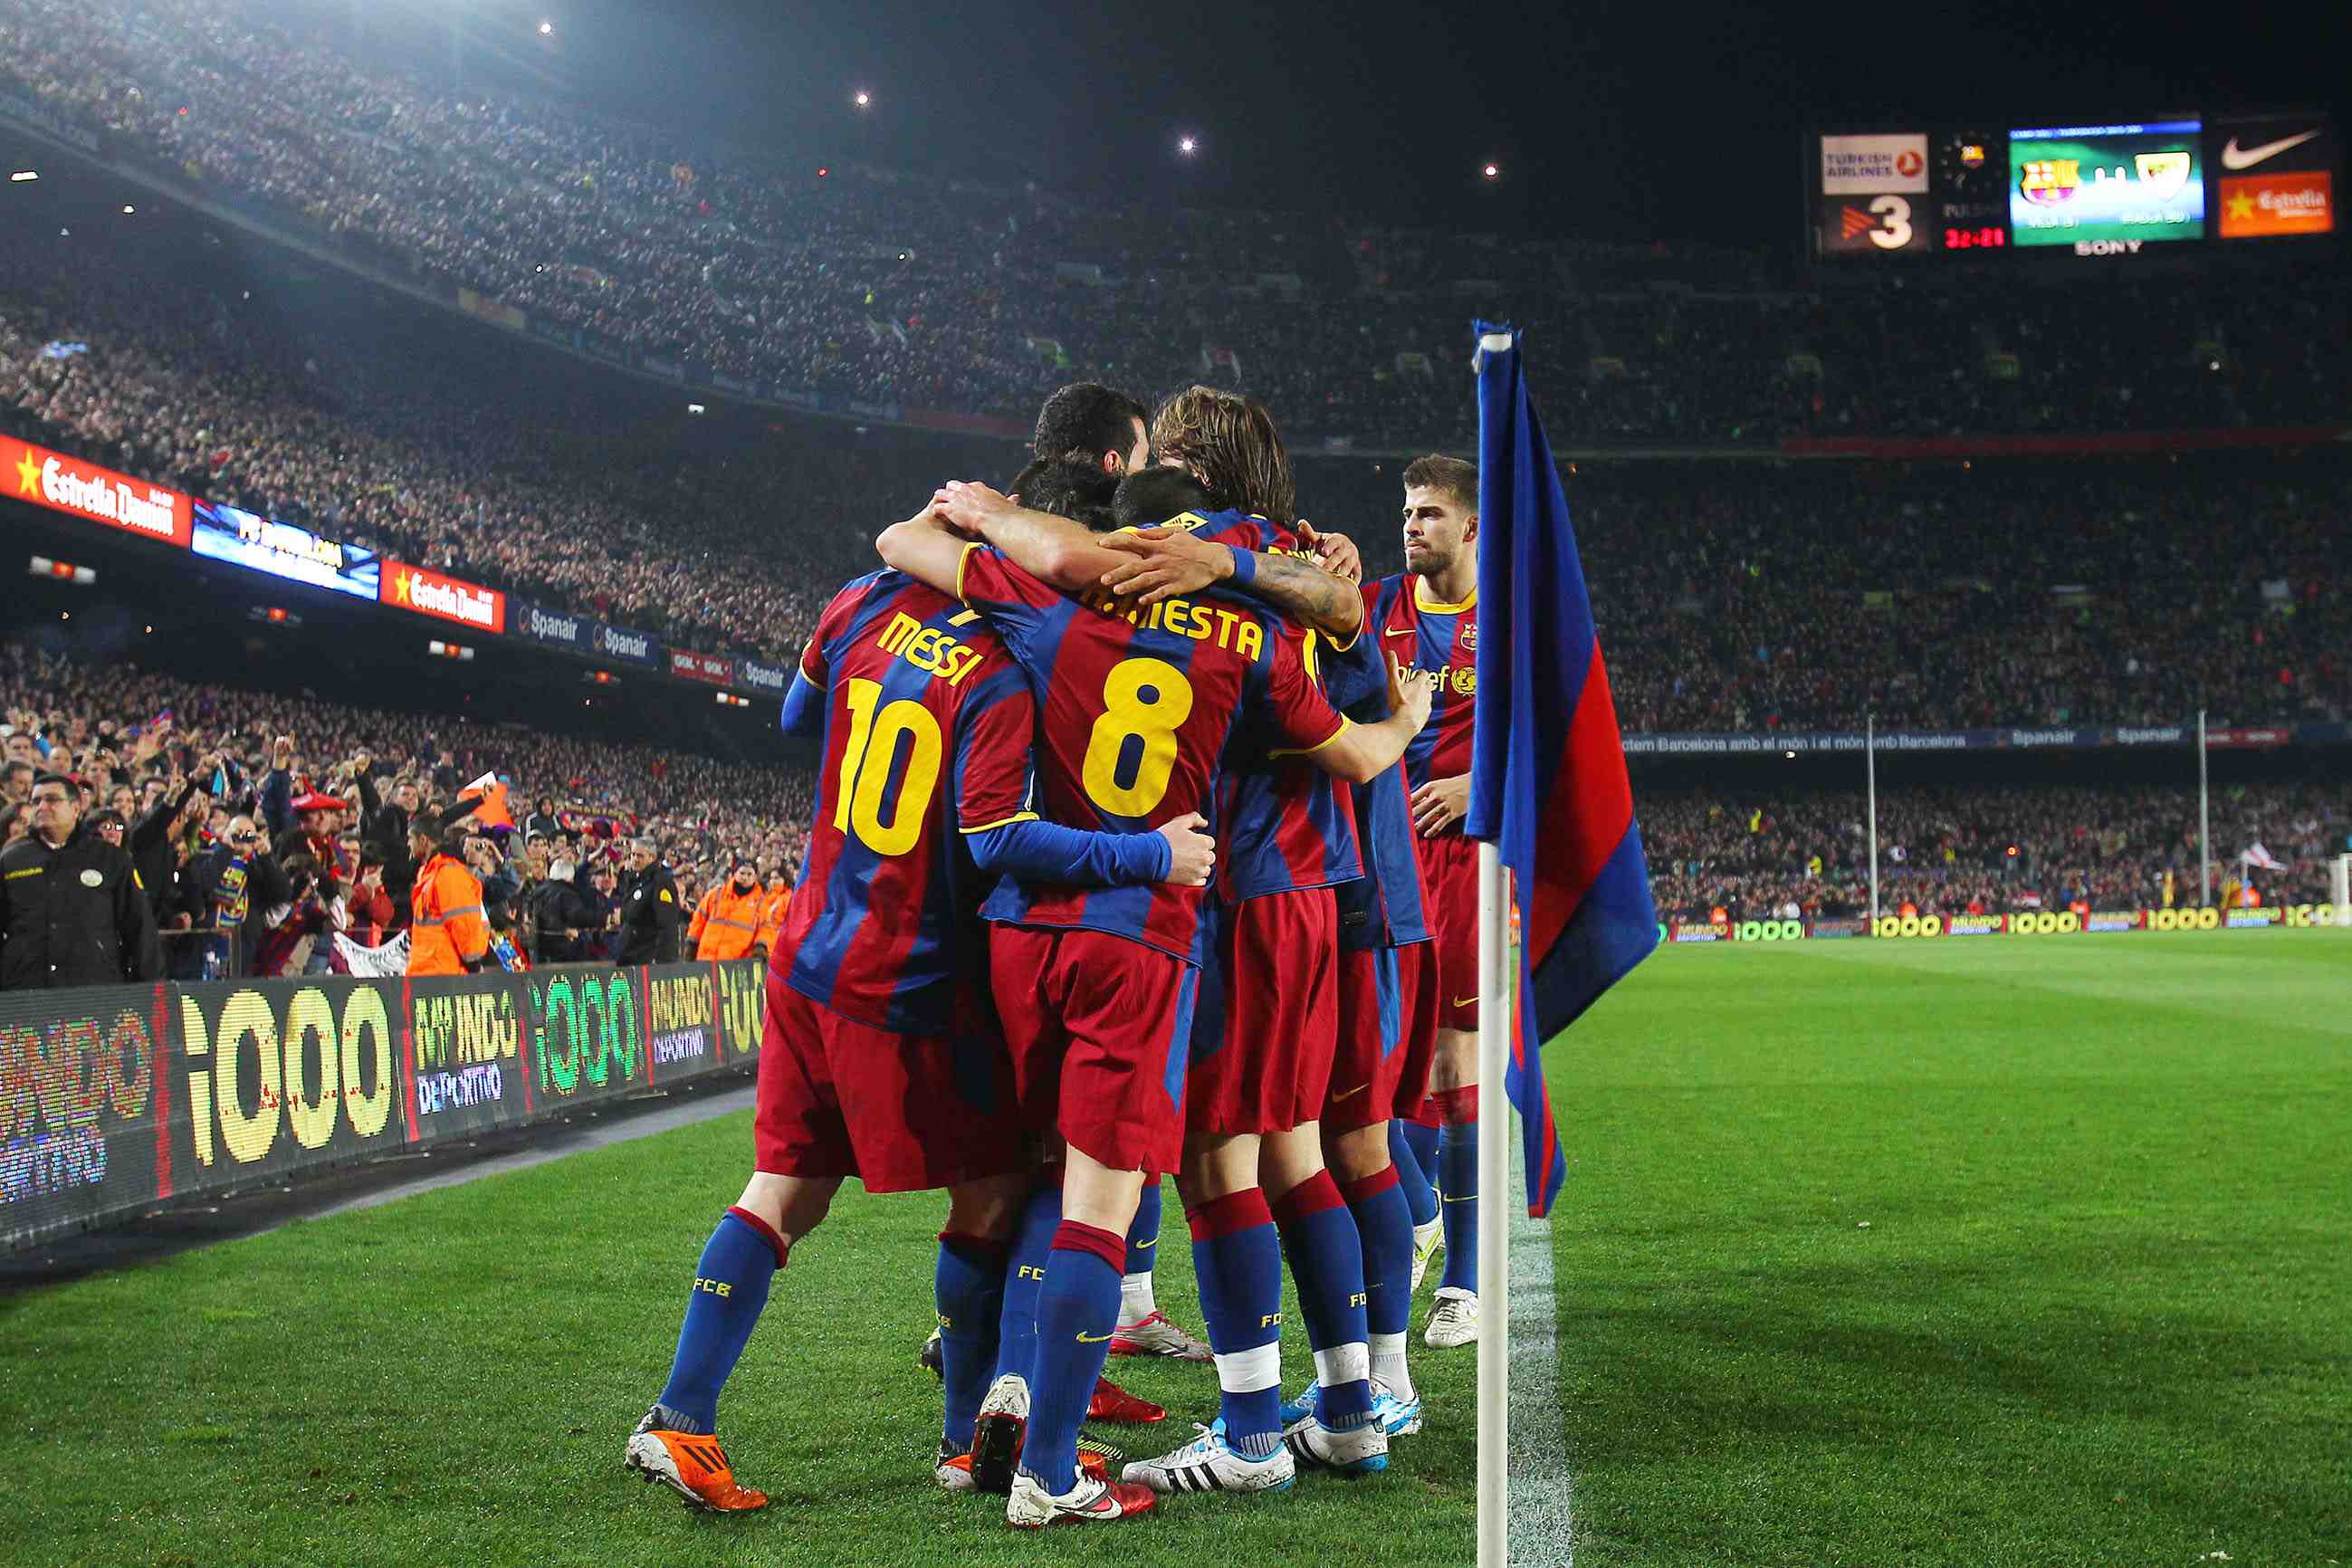 Camp Nou,things to do in Barcelona